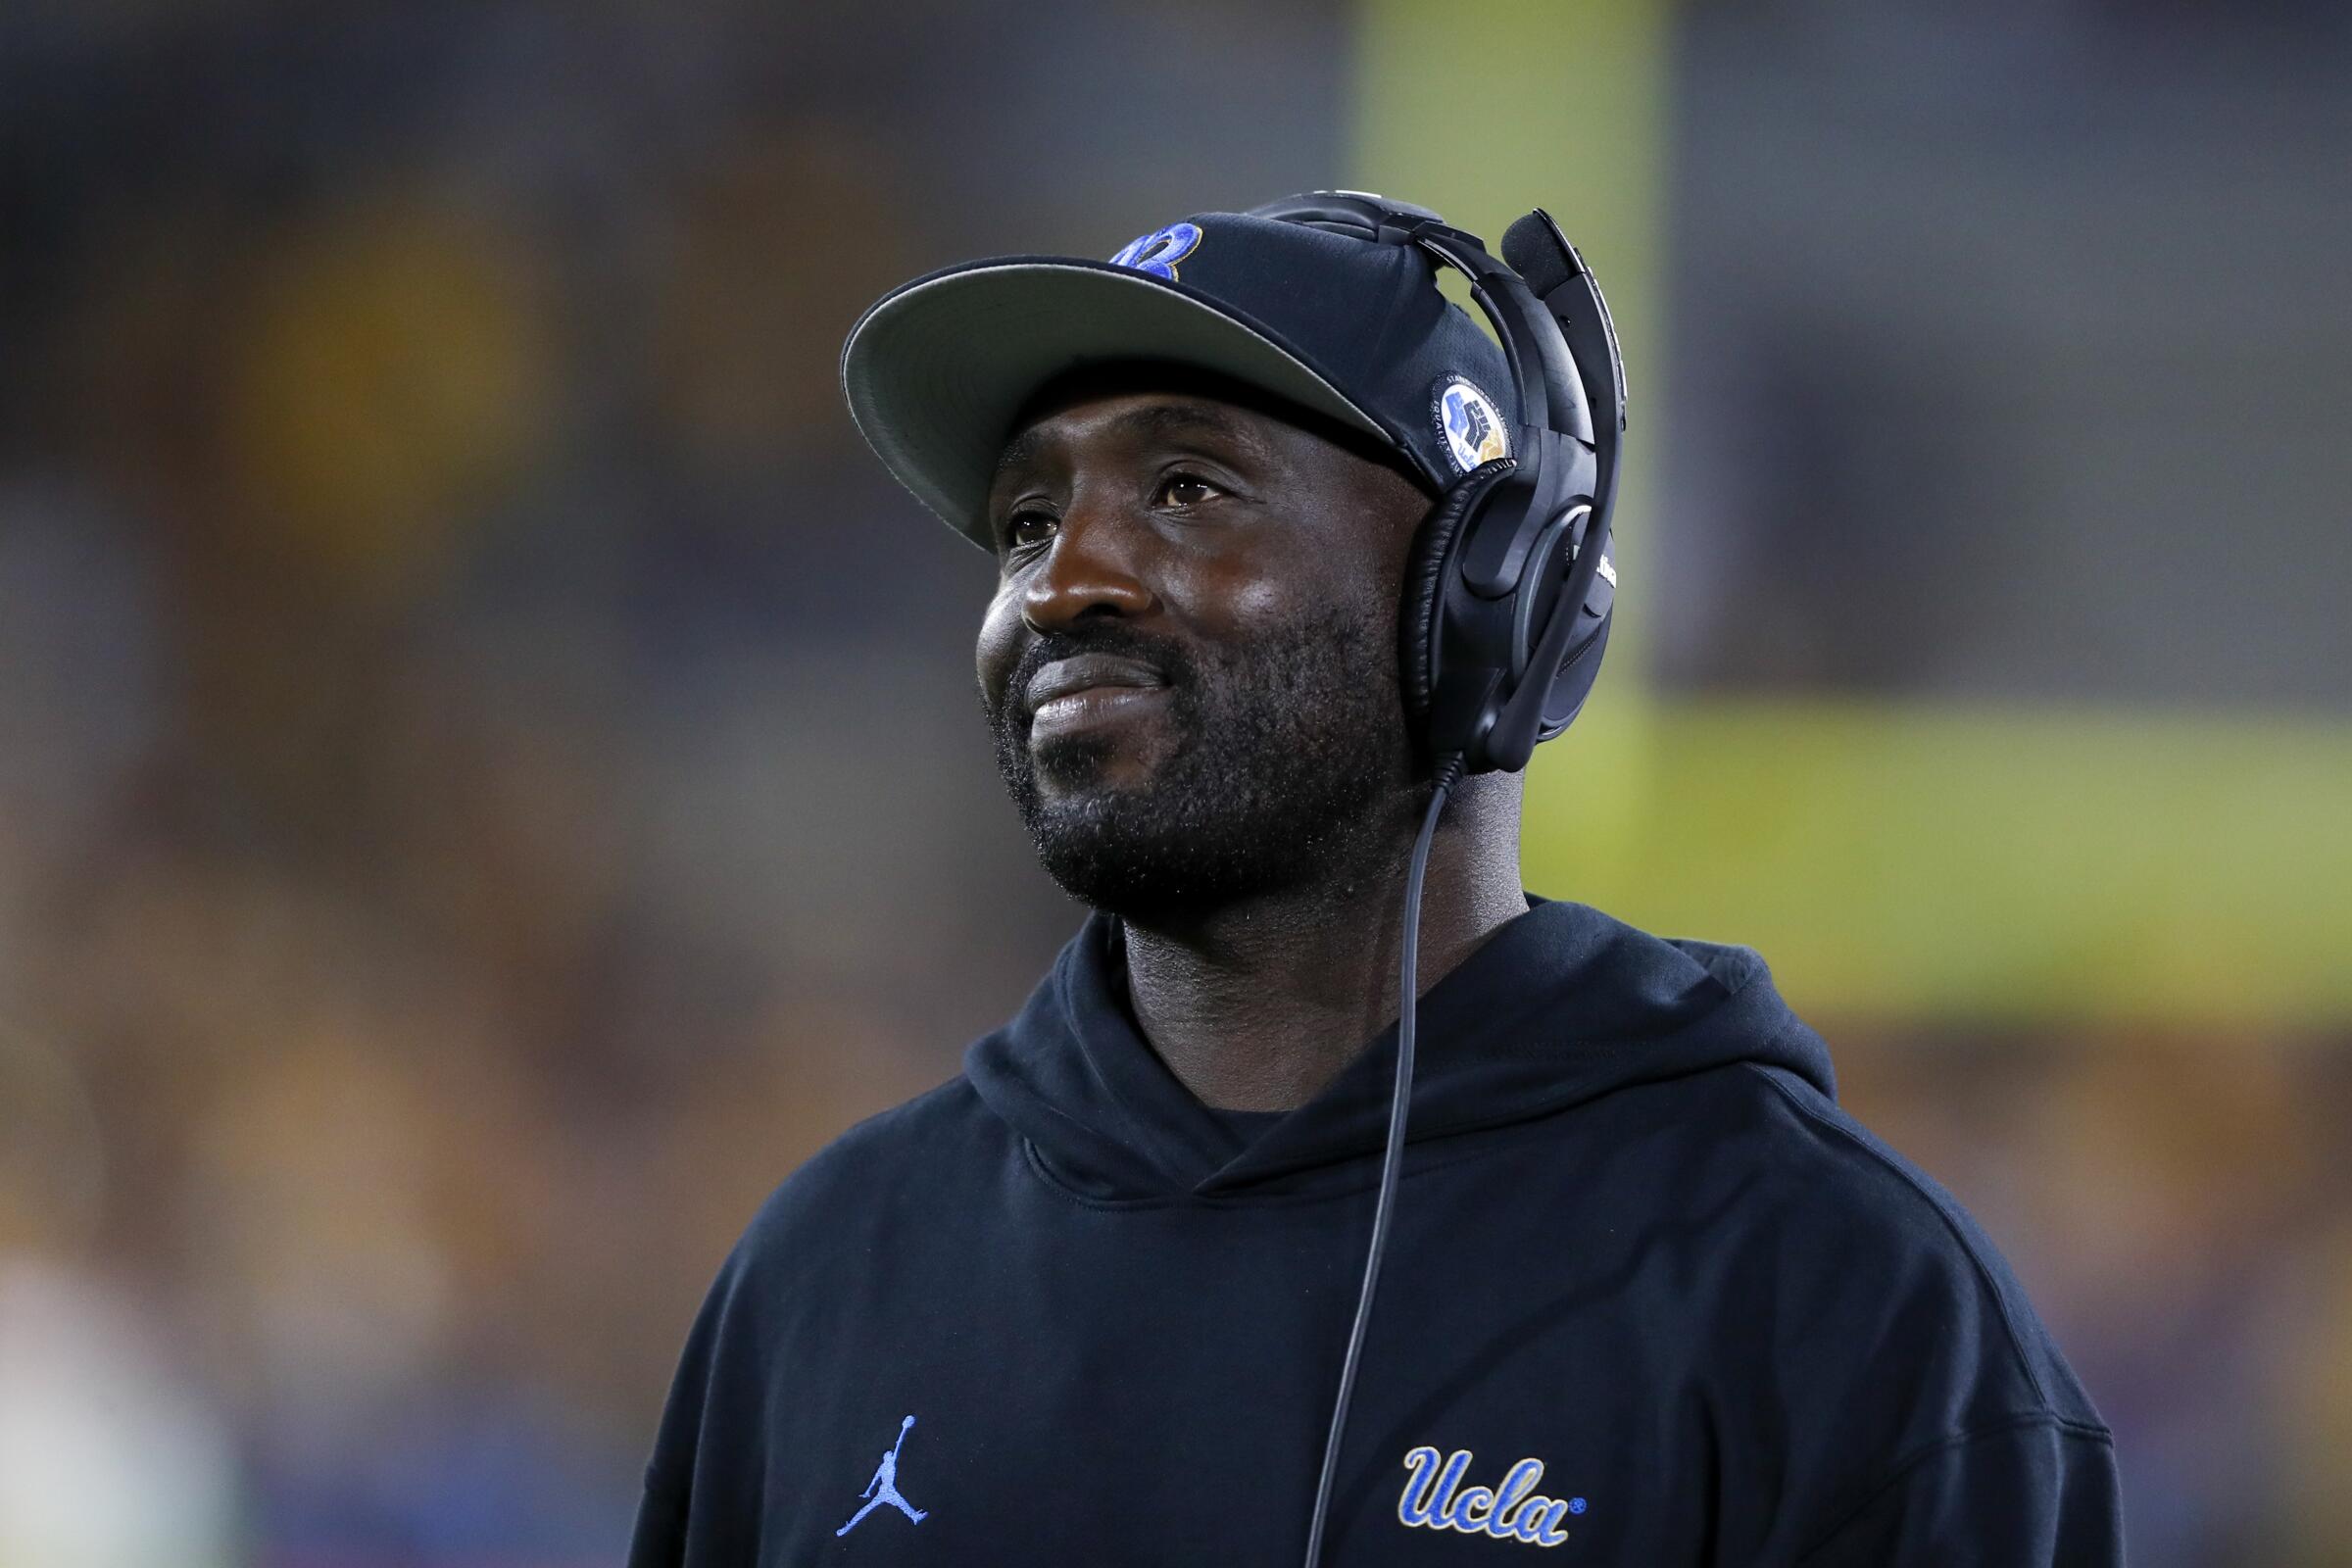 UCLA running backs coach DeShaun Foster on the sideline during a football game against Arizona State.